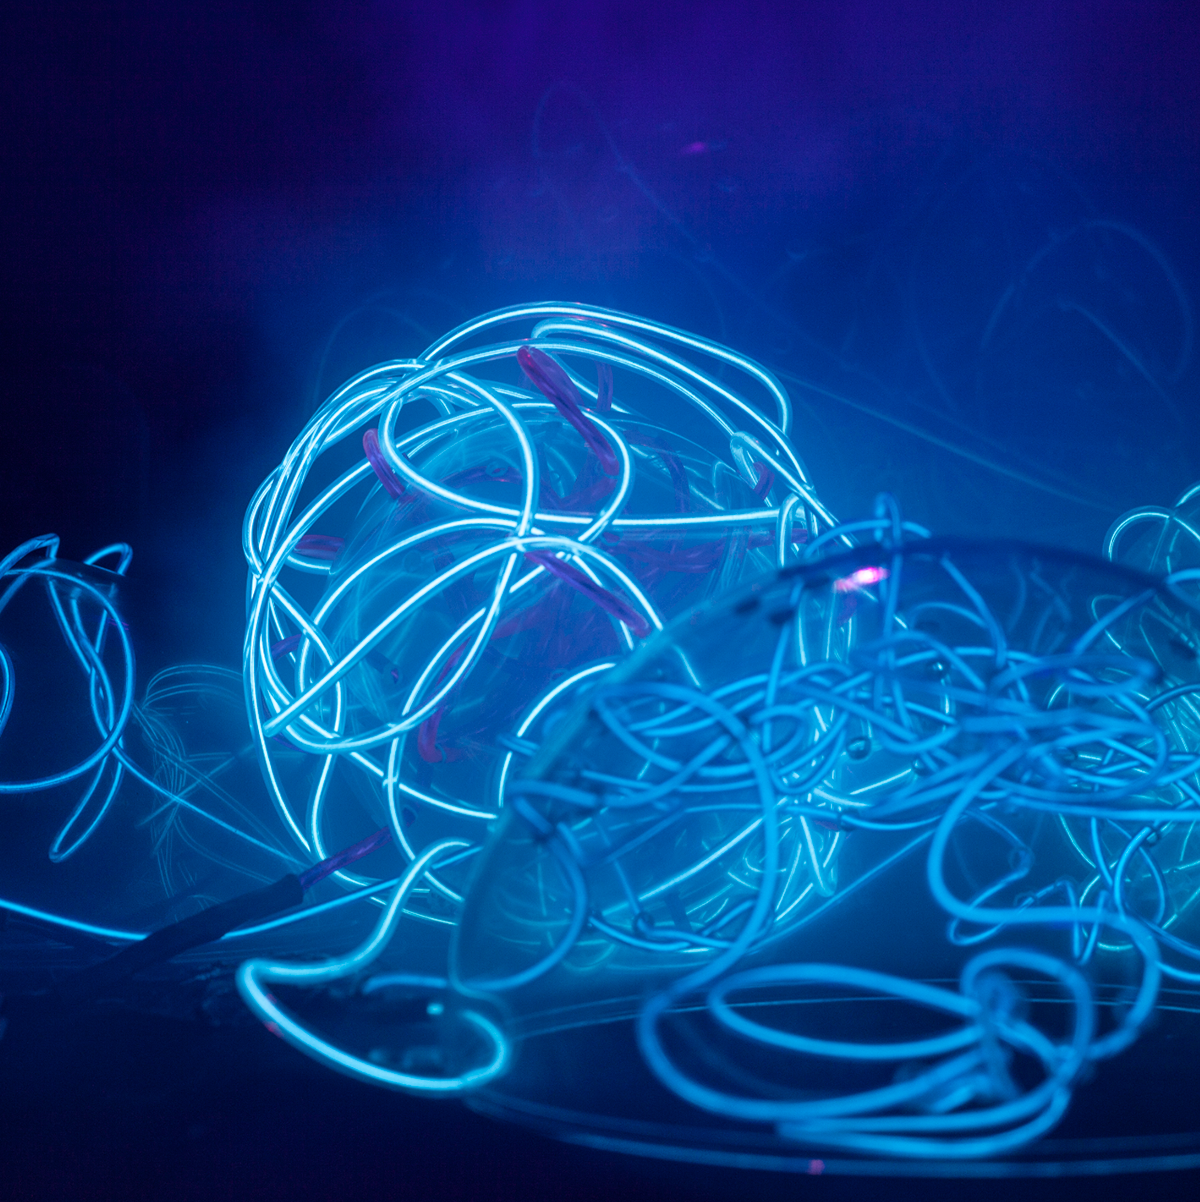 Lumi electroluminescent EL wire interactive light and sound ROBBIE ANSON DUNCAN rad marine inspired Sound responsive